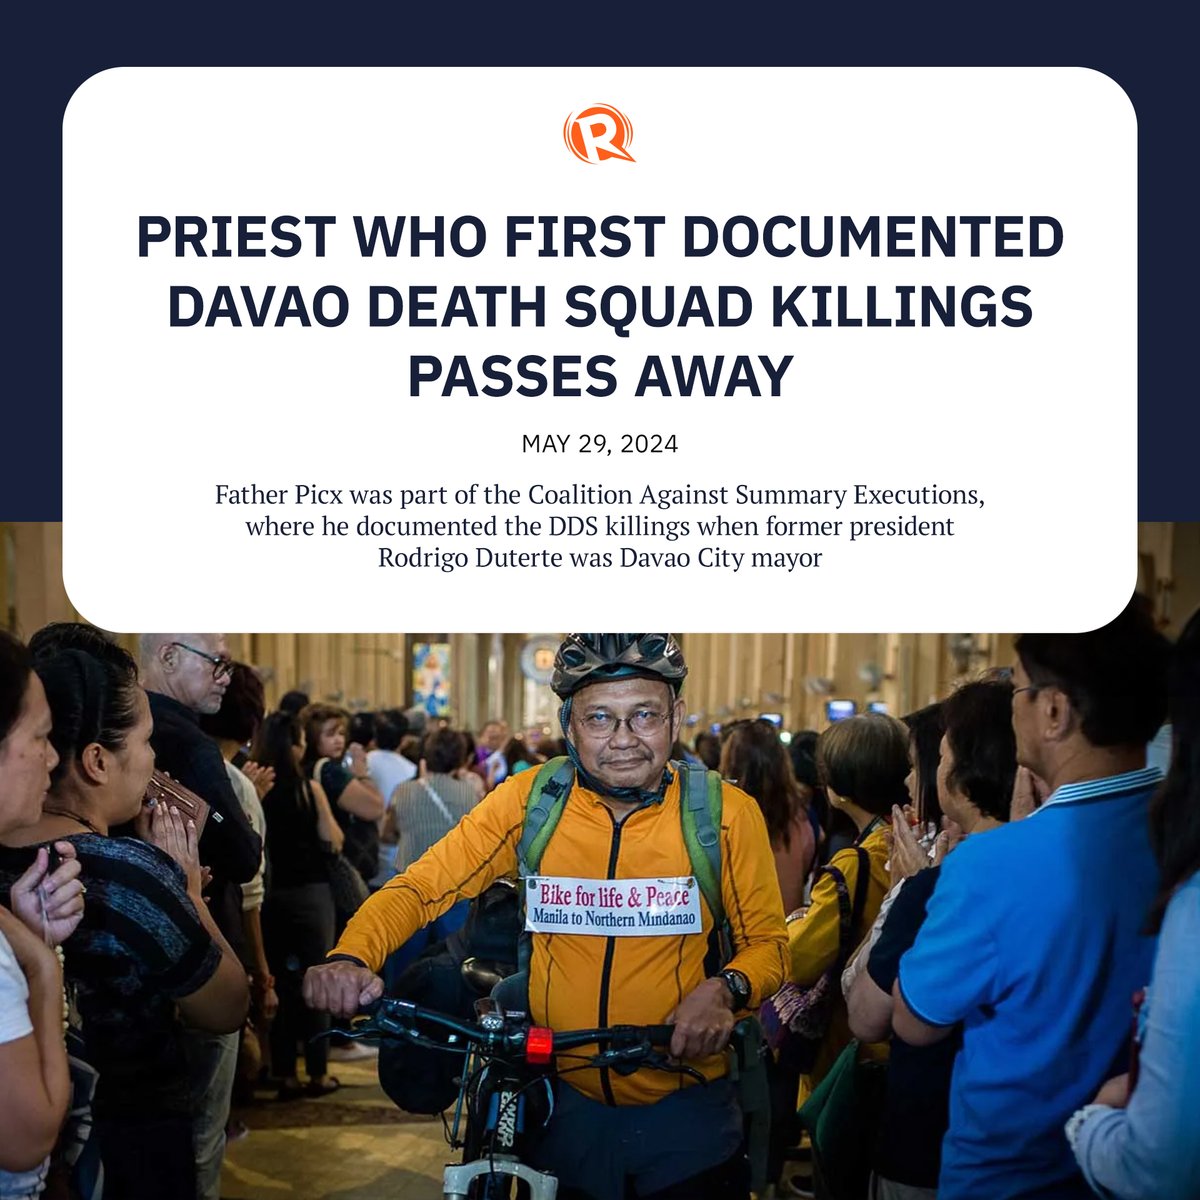 Fr. Amado “Picx” Picardal, the priest who first documented the Davao Death Squad killings, has passed away at 69 years old. trib.al/5U9tOcK